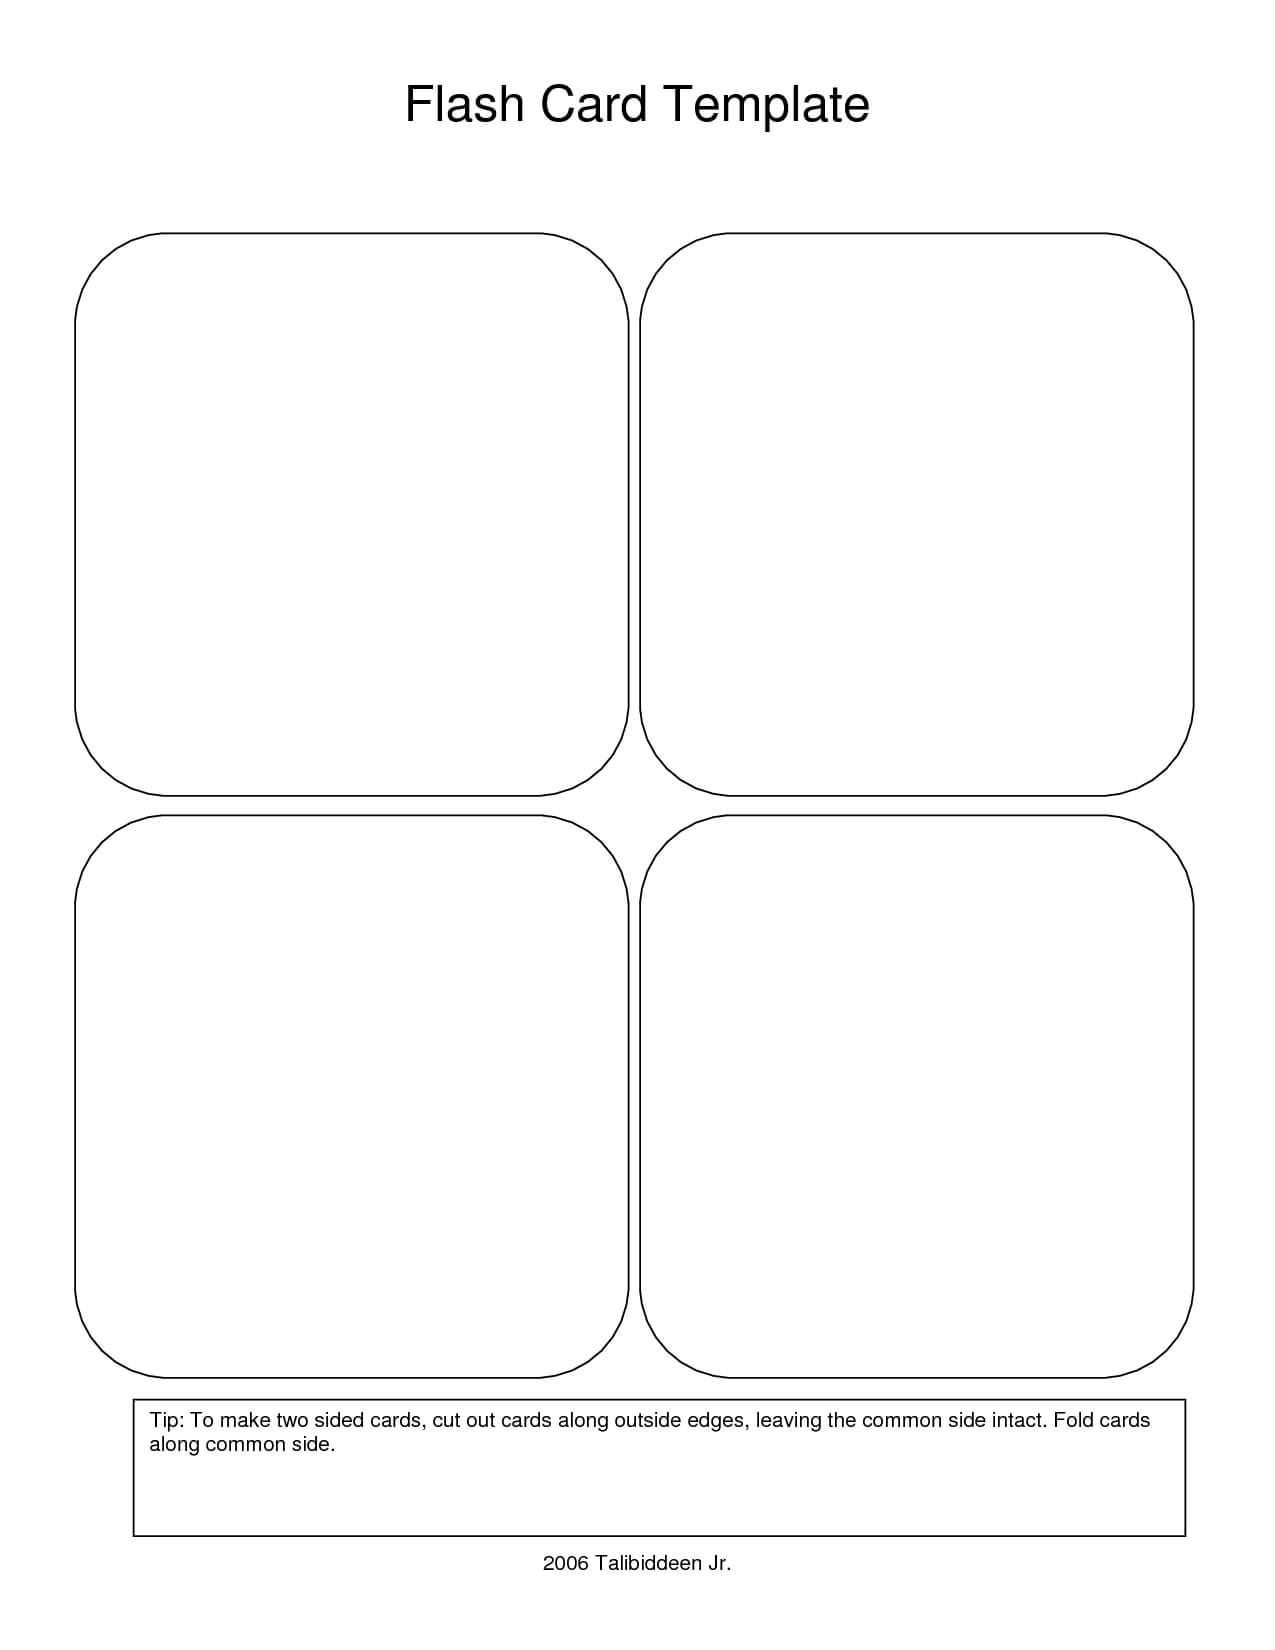 28 Images Of Flashcard Template Word | Unemeuf Throughout Cue Card Template